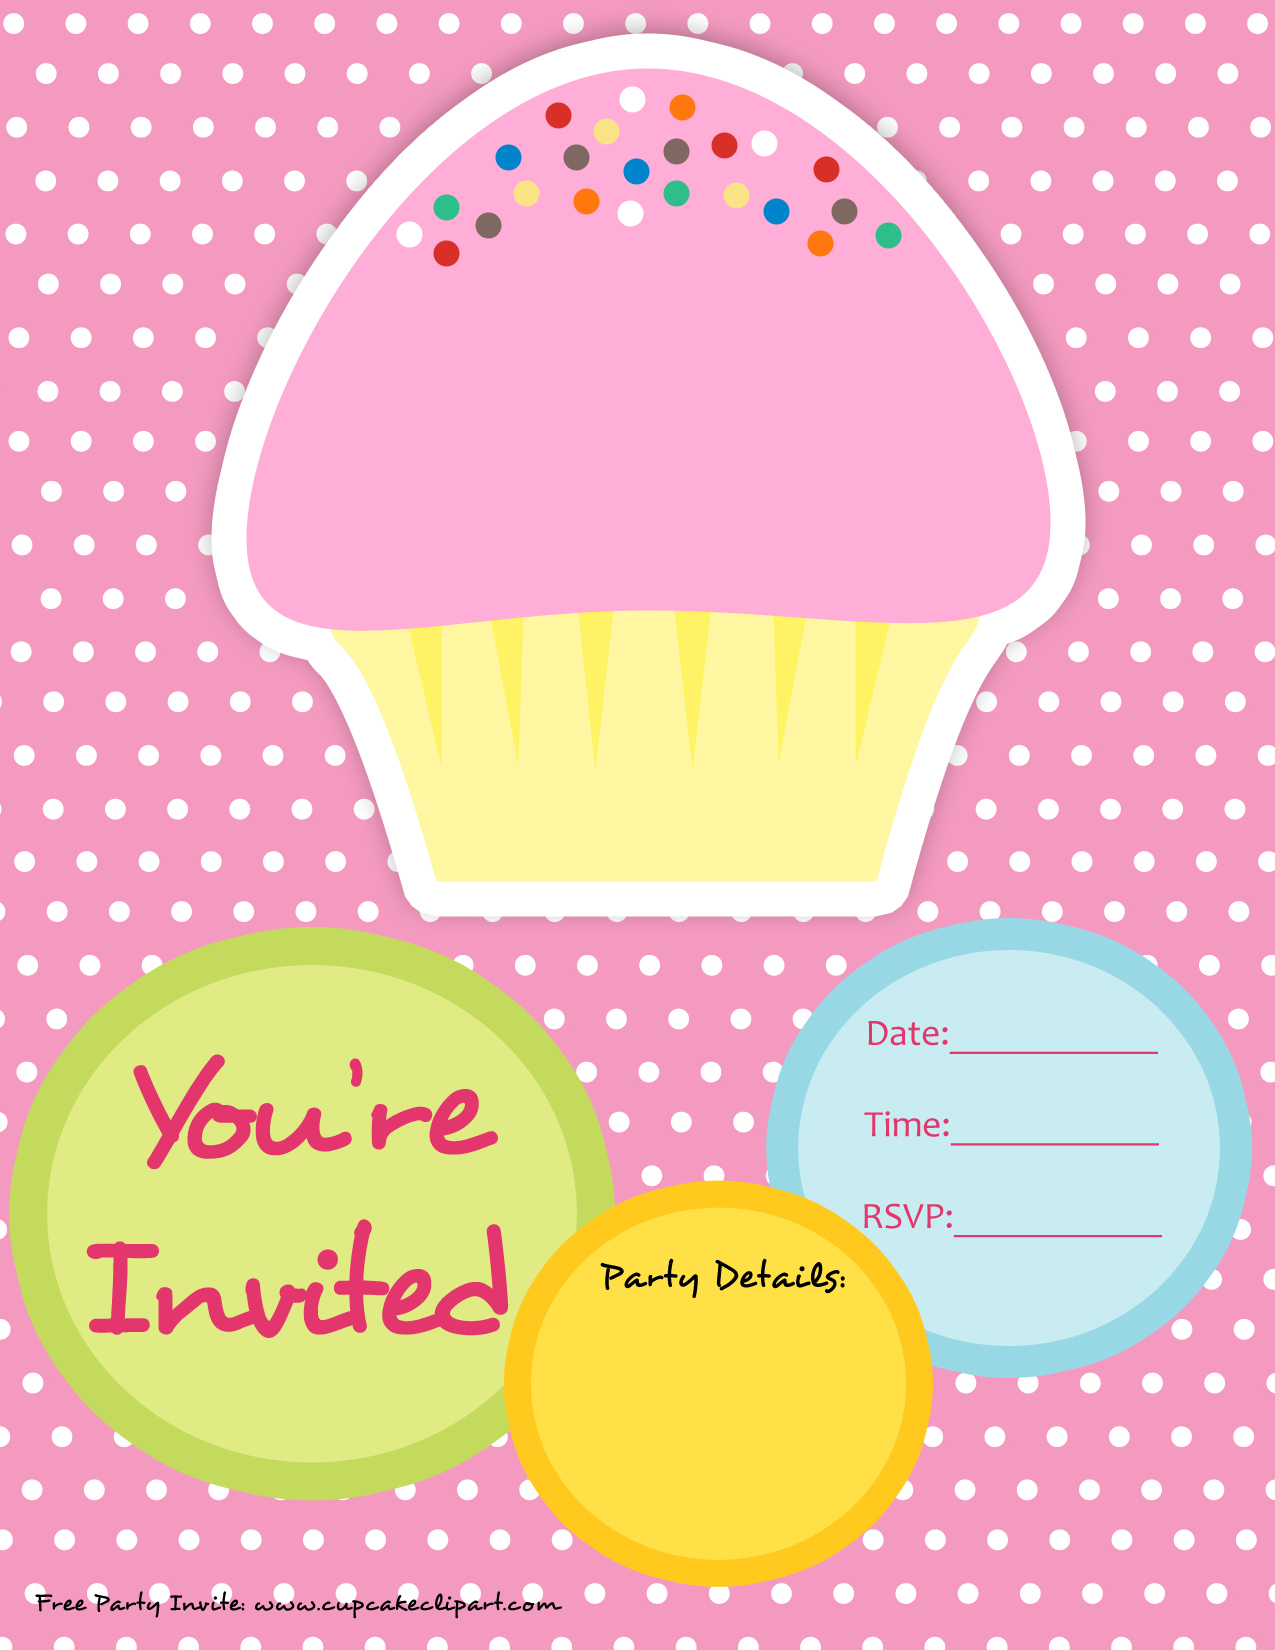 Dec 28 2011 By Cupcake Lover In Cupcake Invitations